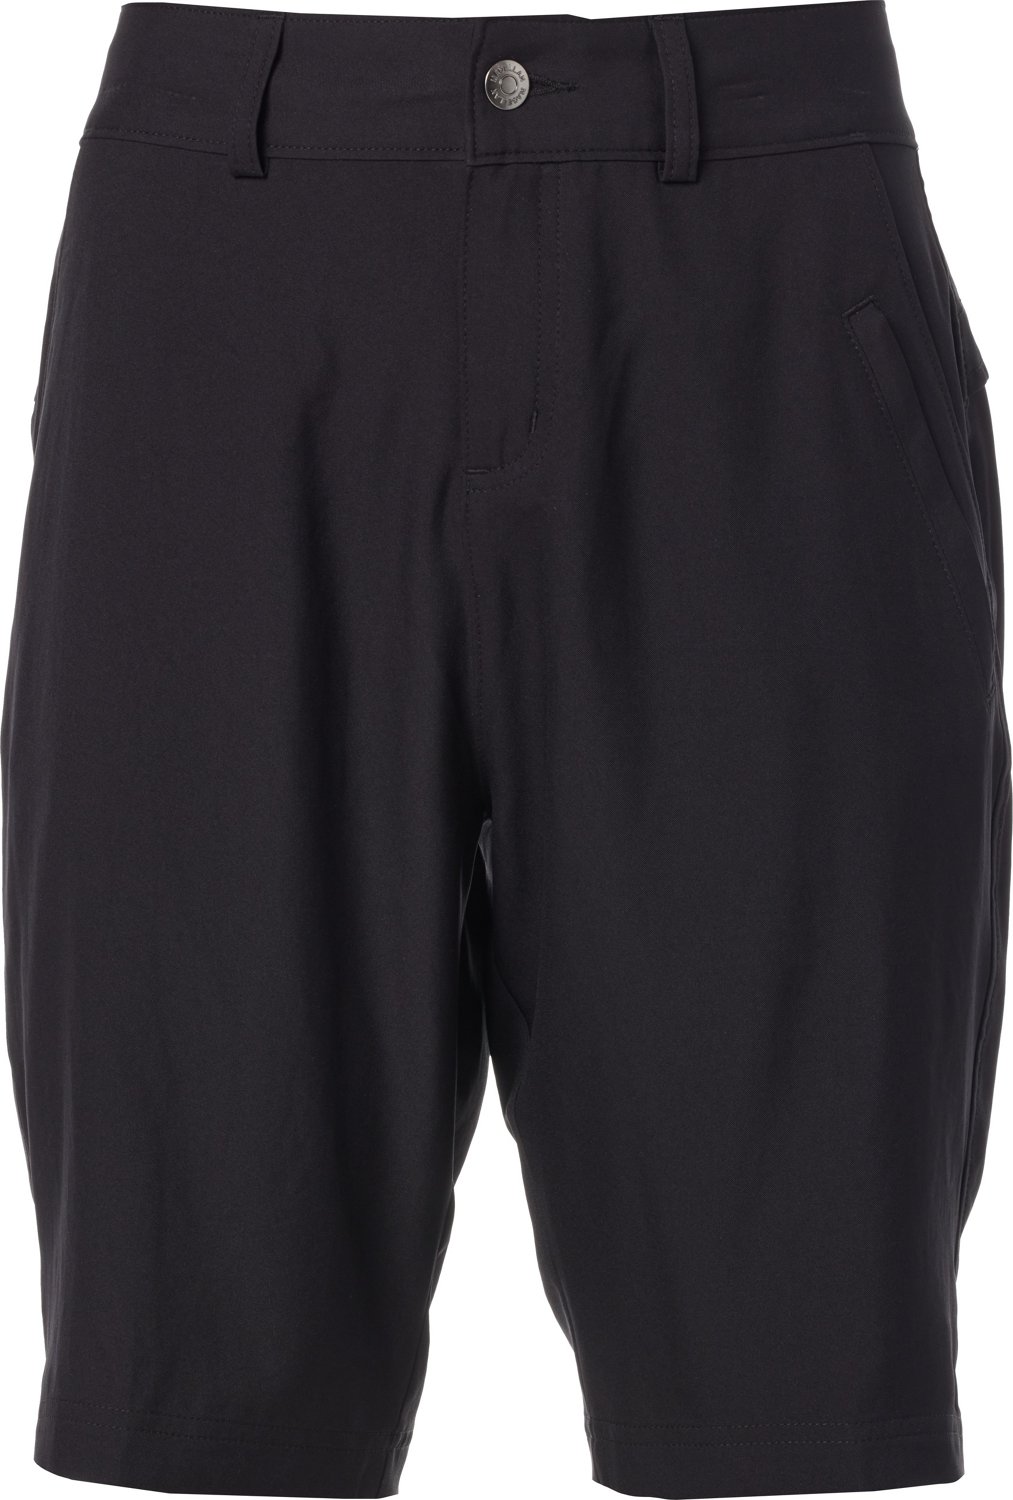 Magellan Outdoors Women's Shorts | Only at Academy